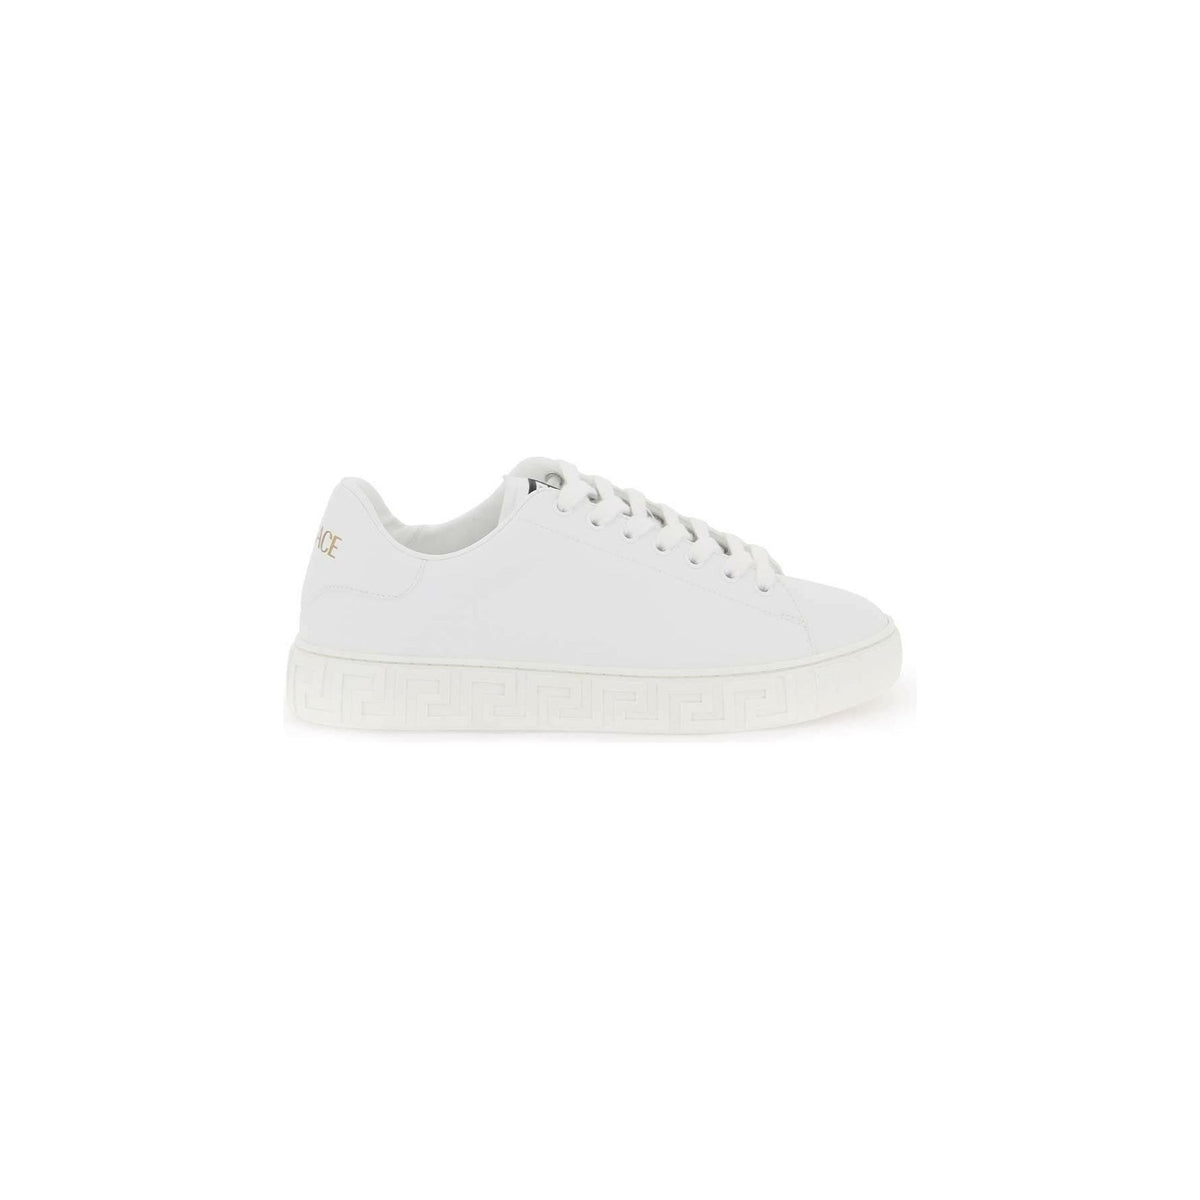 VERSACE - White Faux Leather Greca Sneakers With Embossed Motif - JOHN JULIA